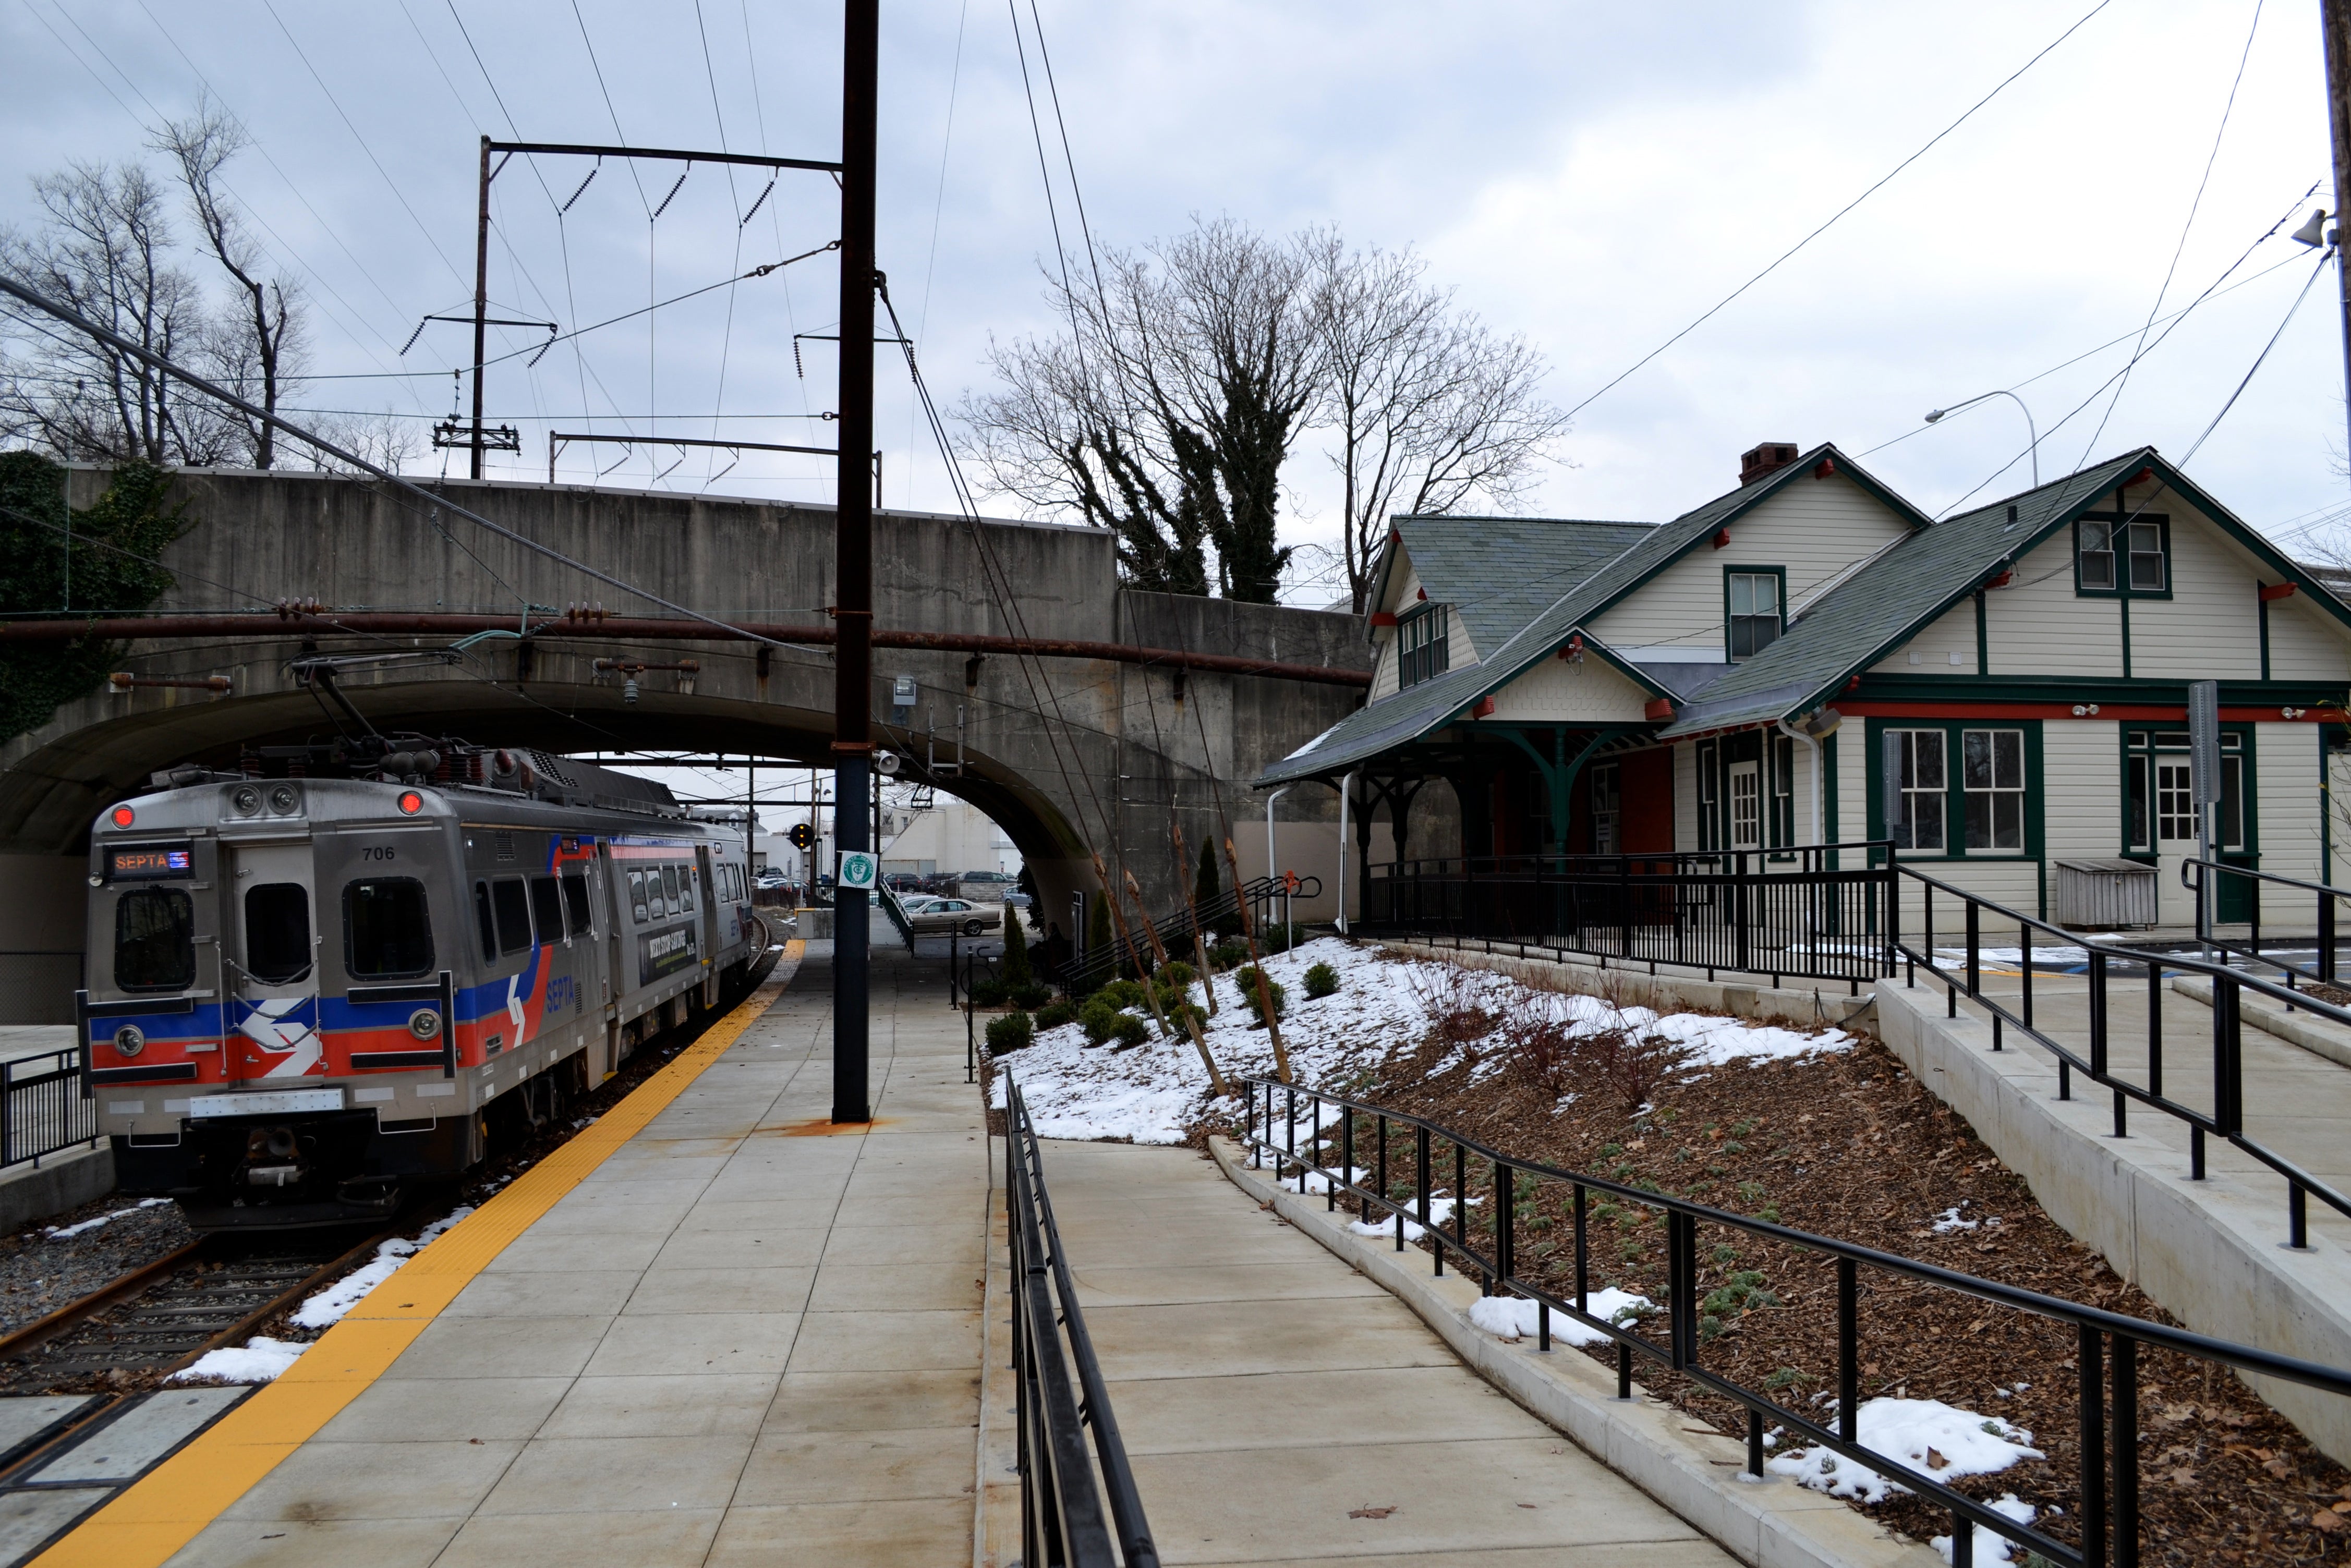 Lower Merion Historical Society nearing completion on Cynwyd Station historical renovation